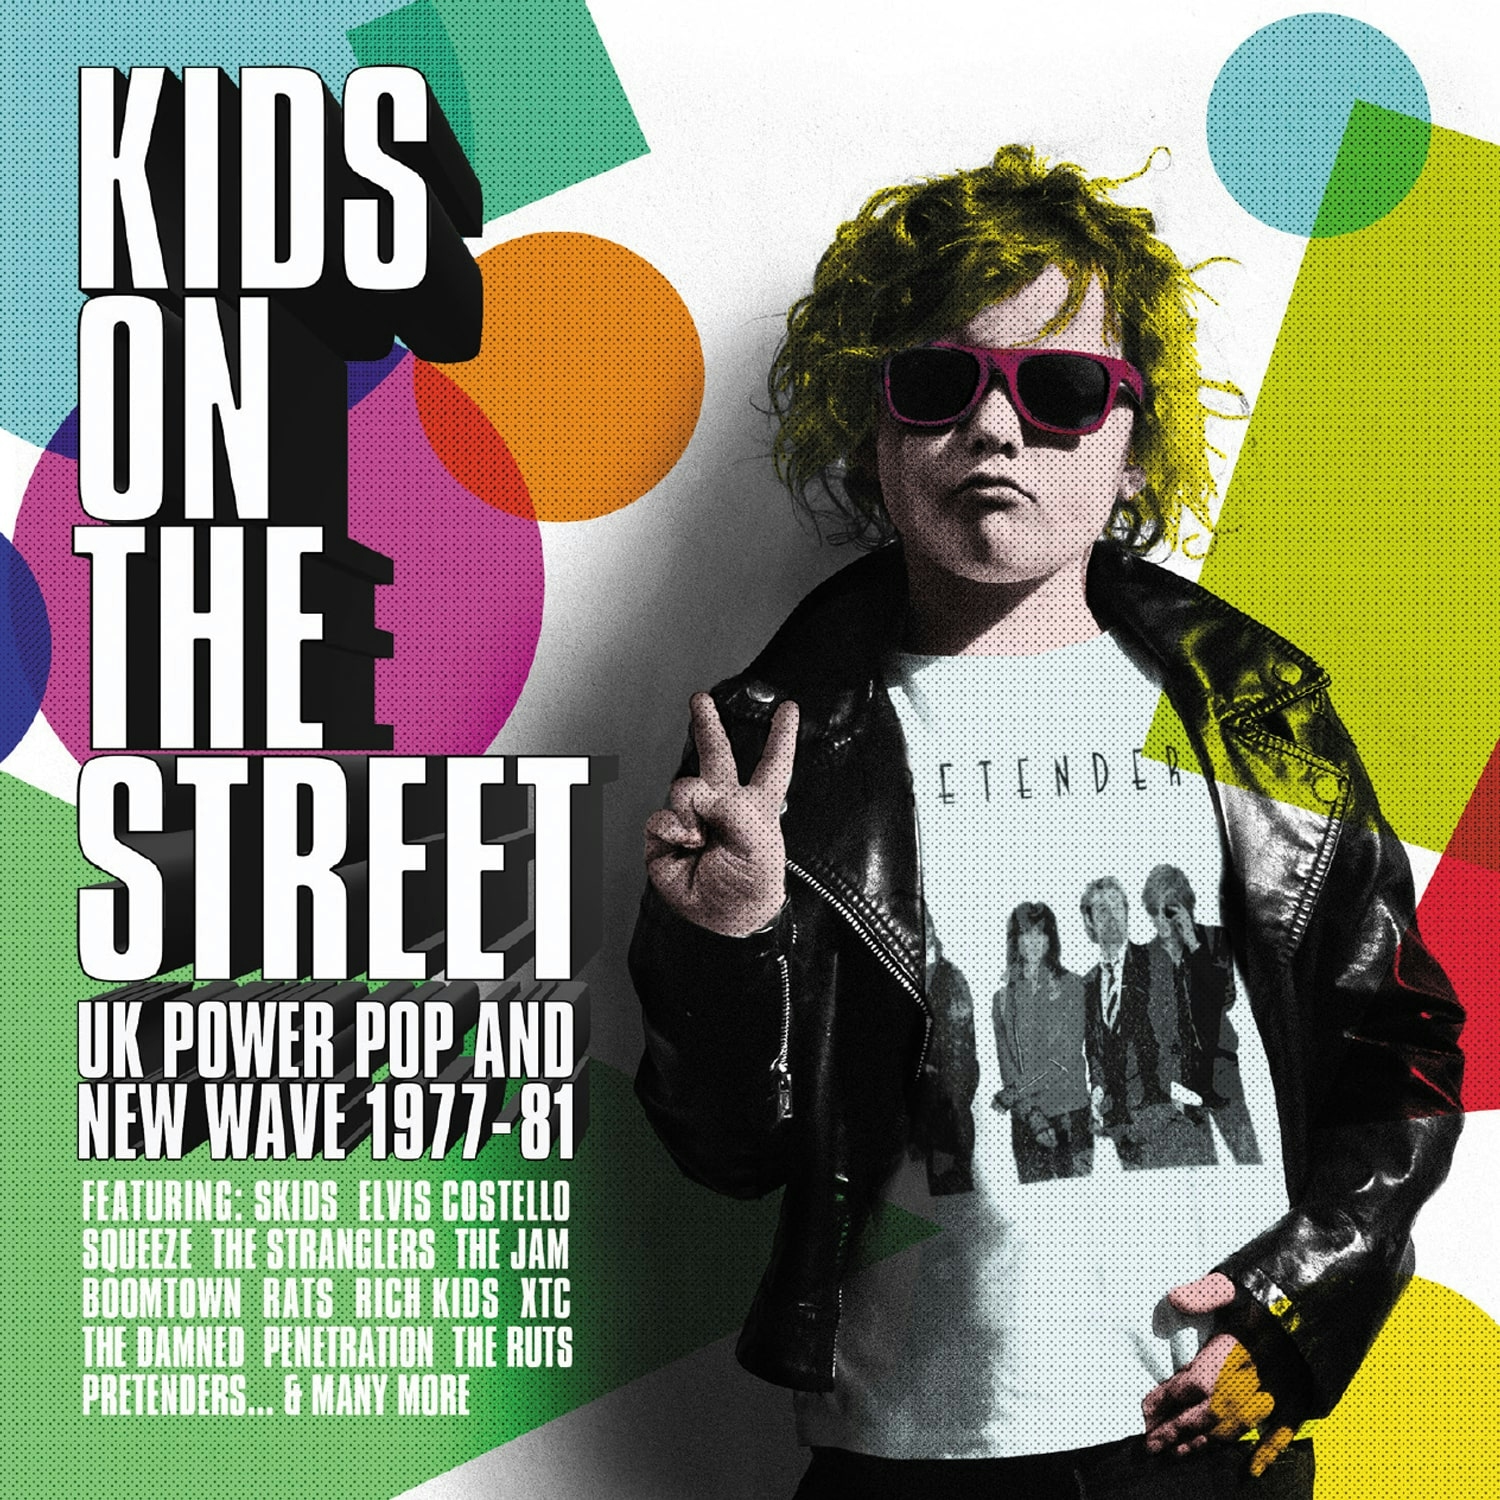 Album artwork for Album artwork for Kids On The Street – UK Power Pop and New Wave 1977-1981 by Various by Kids On The Street – UK Power Pop and New Wave 1977-1981 - Various